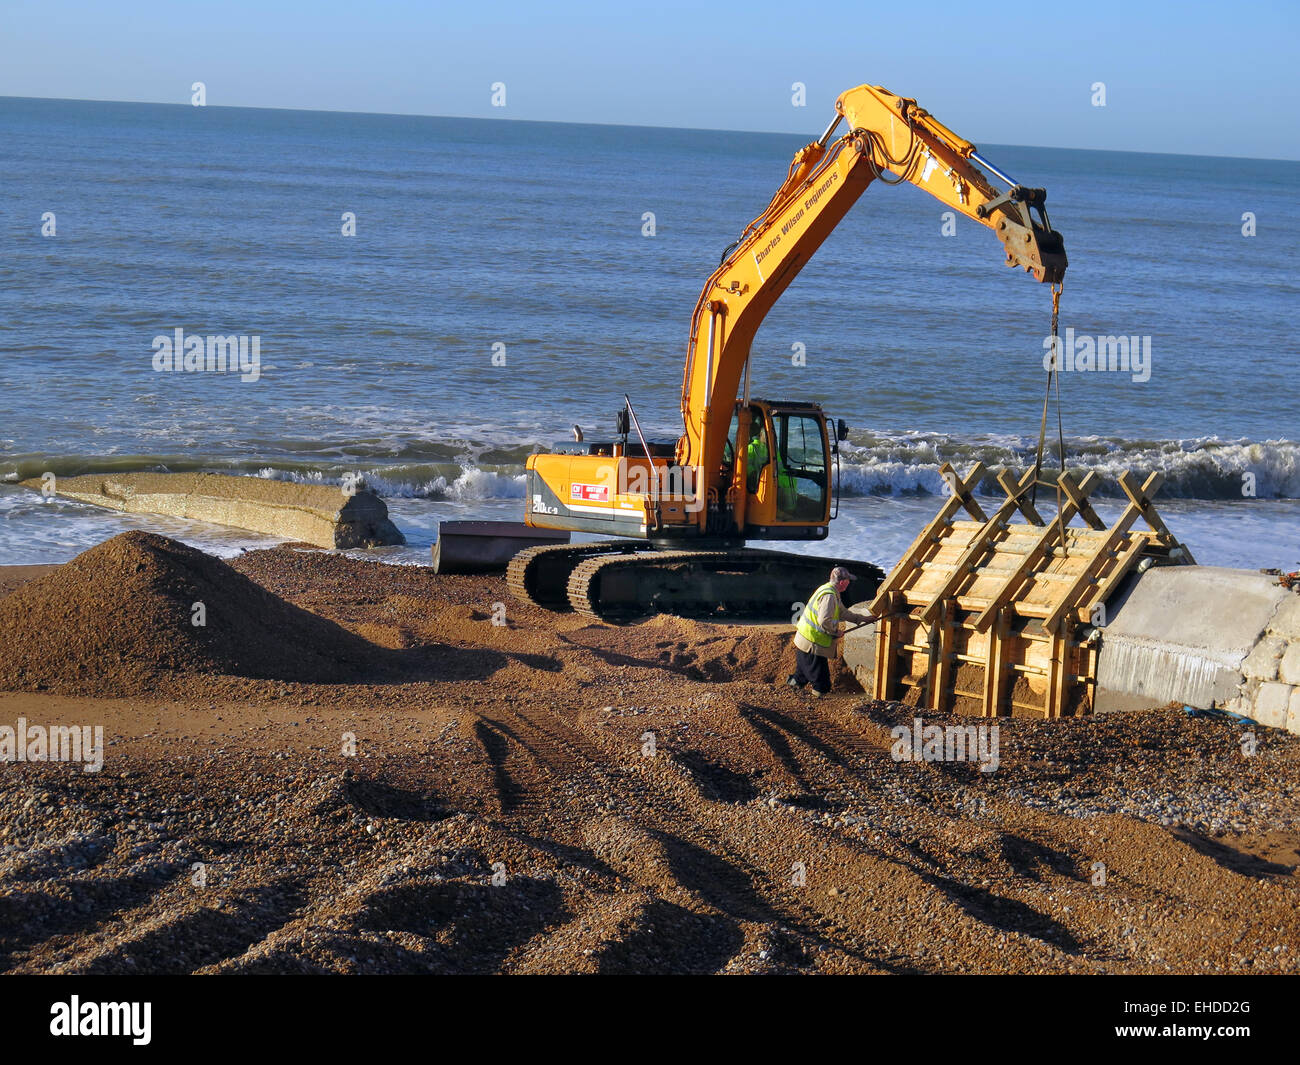 A Caterpillar Digger and Thorne Civil Engineering workers prepare to remove wooden moulding from new concrete Groynes being built on Hove beach, East Sussex. Stock Photo